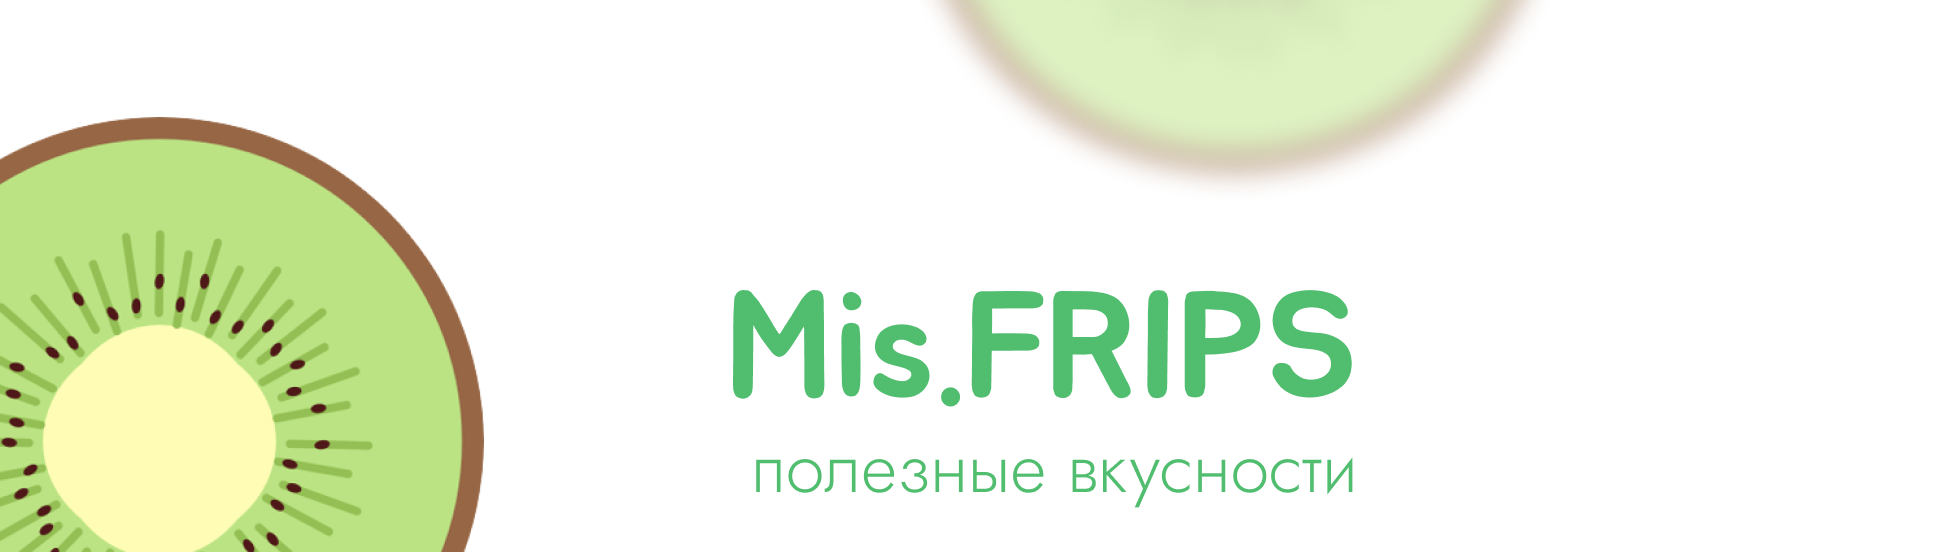 Mis.FRIPS